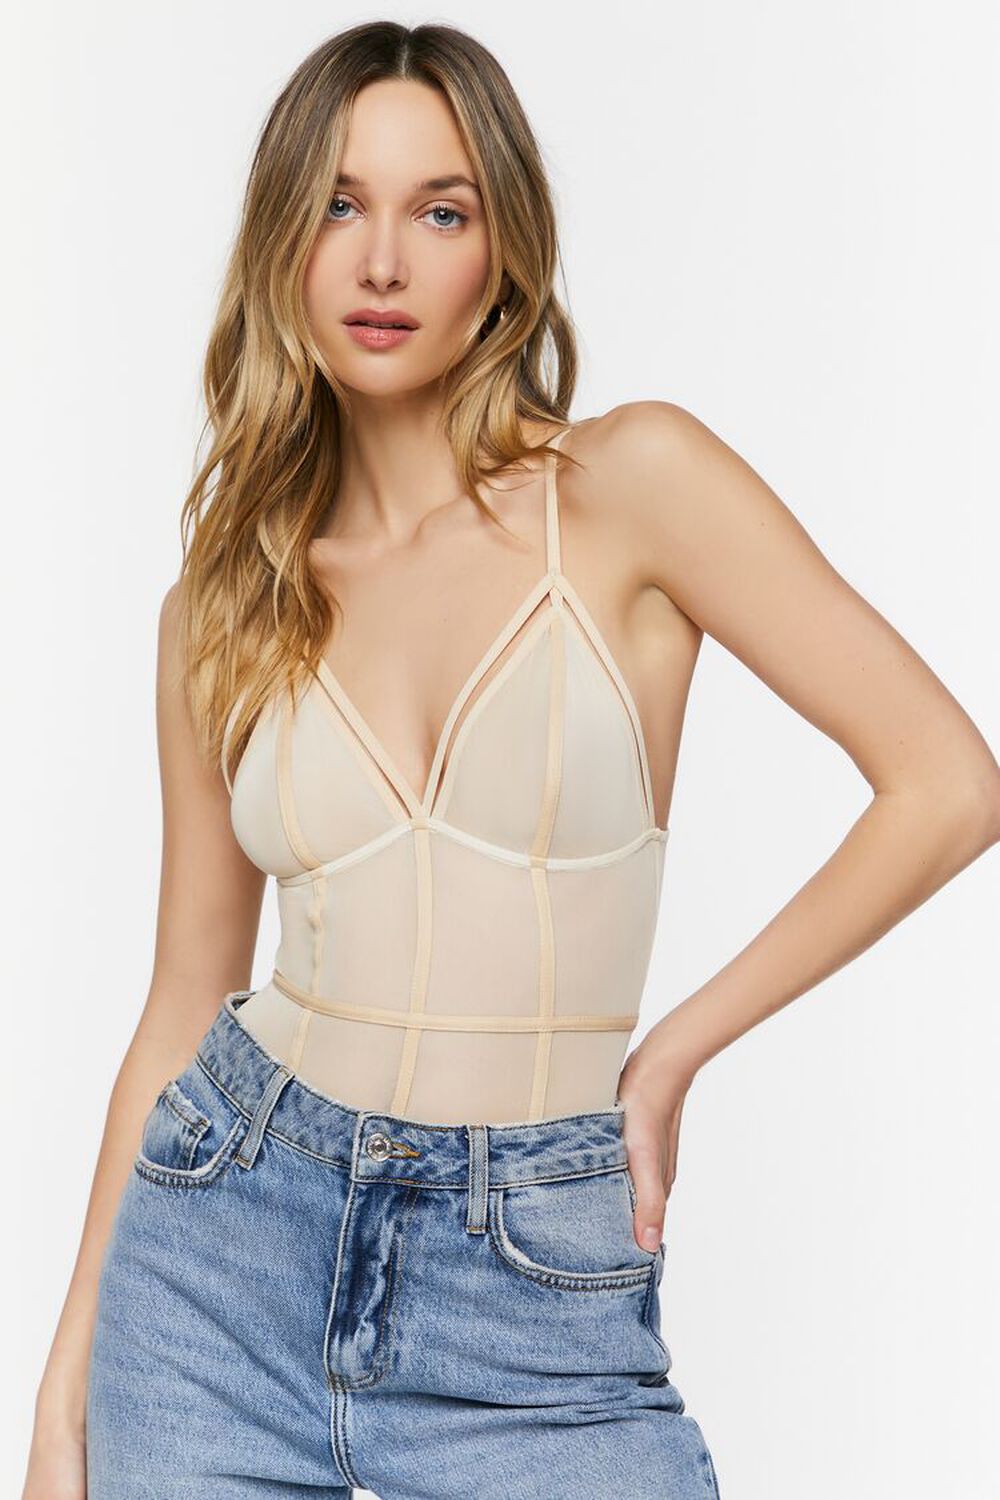 NUDE Plunging Mesh Caged Bodysuit, image 1